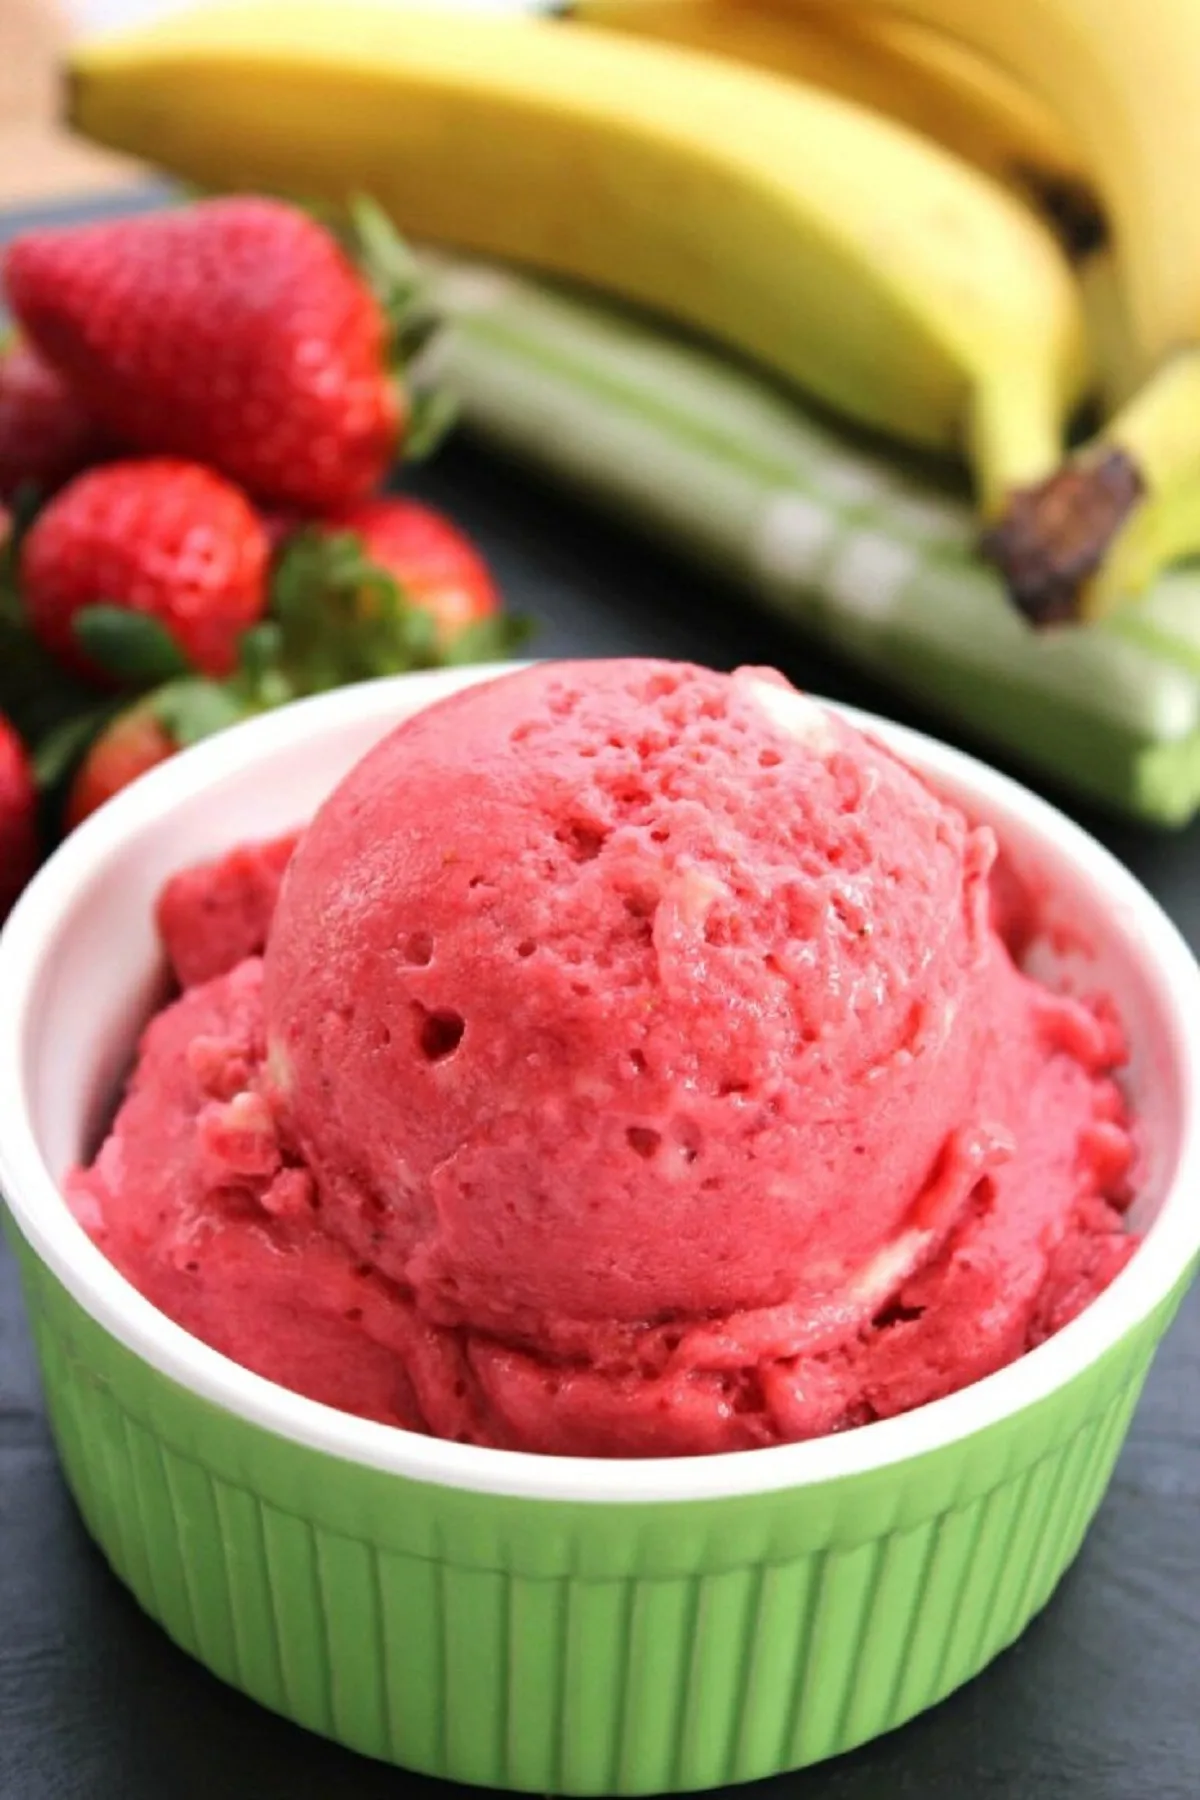 This dairy-free strawberry banana ice cream recipe is a delicious way to cool down over summer! It's a healthy treat made with just fruit!